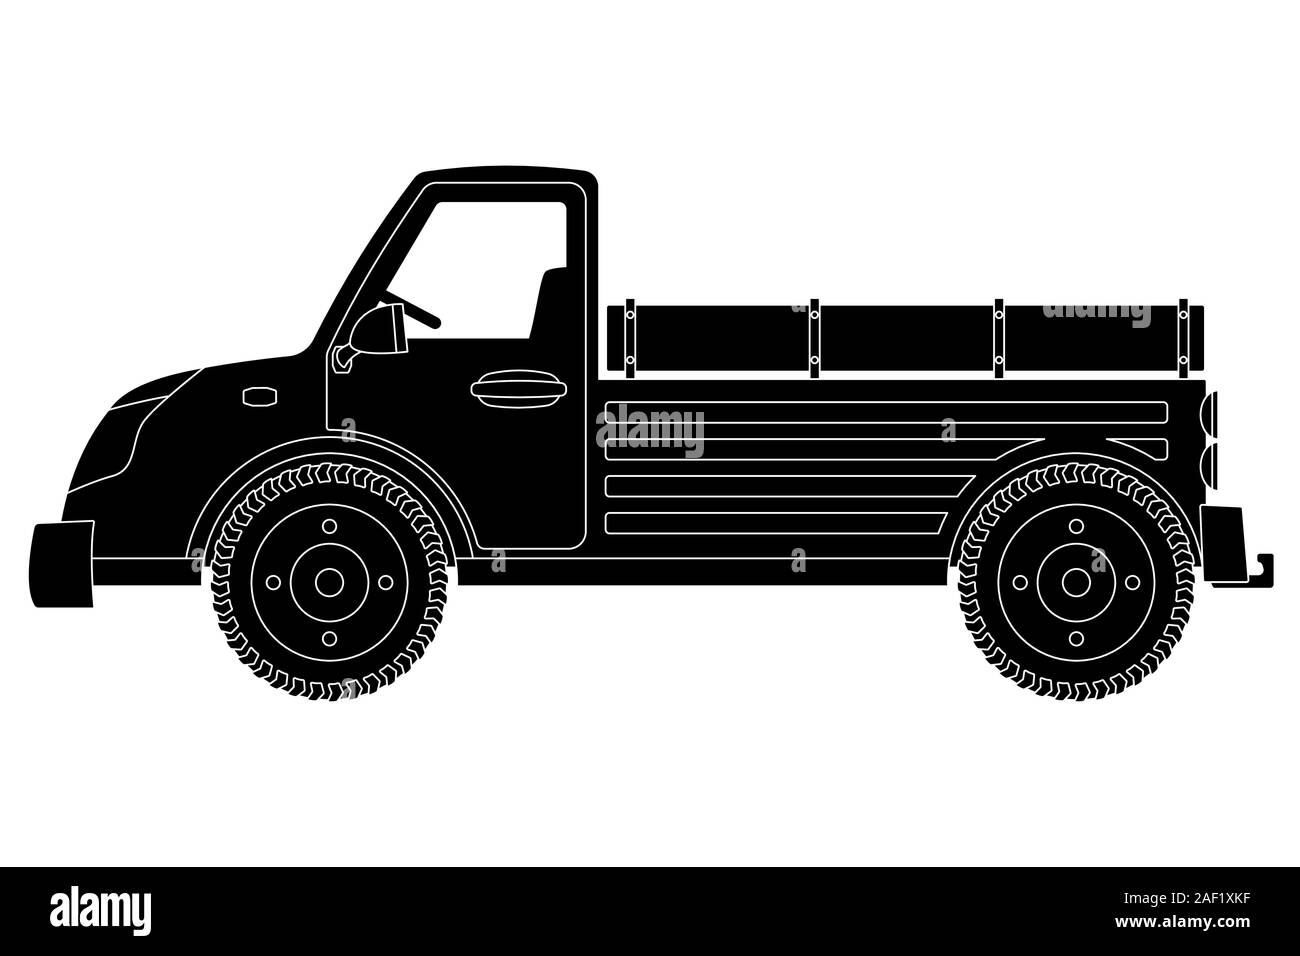 Truck. Black technical drawing Stock Vector